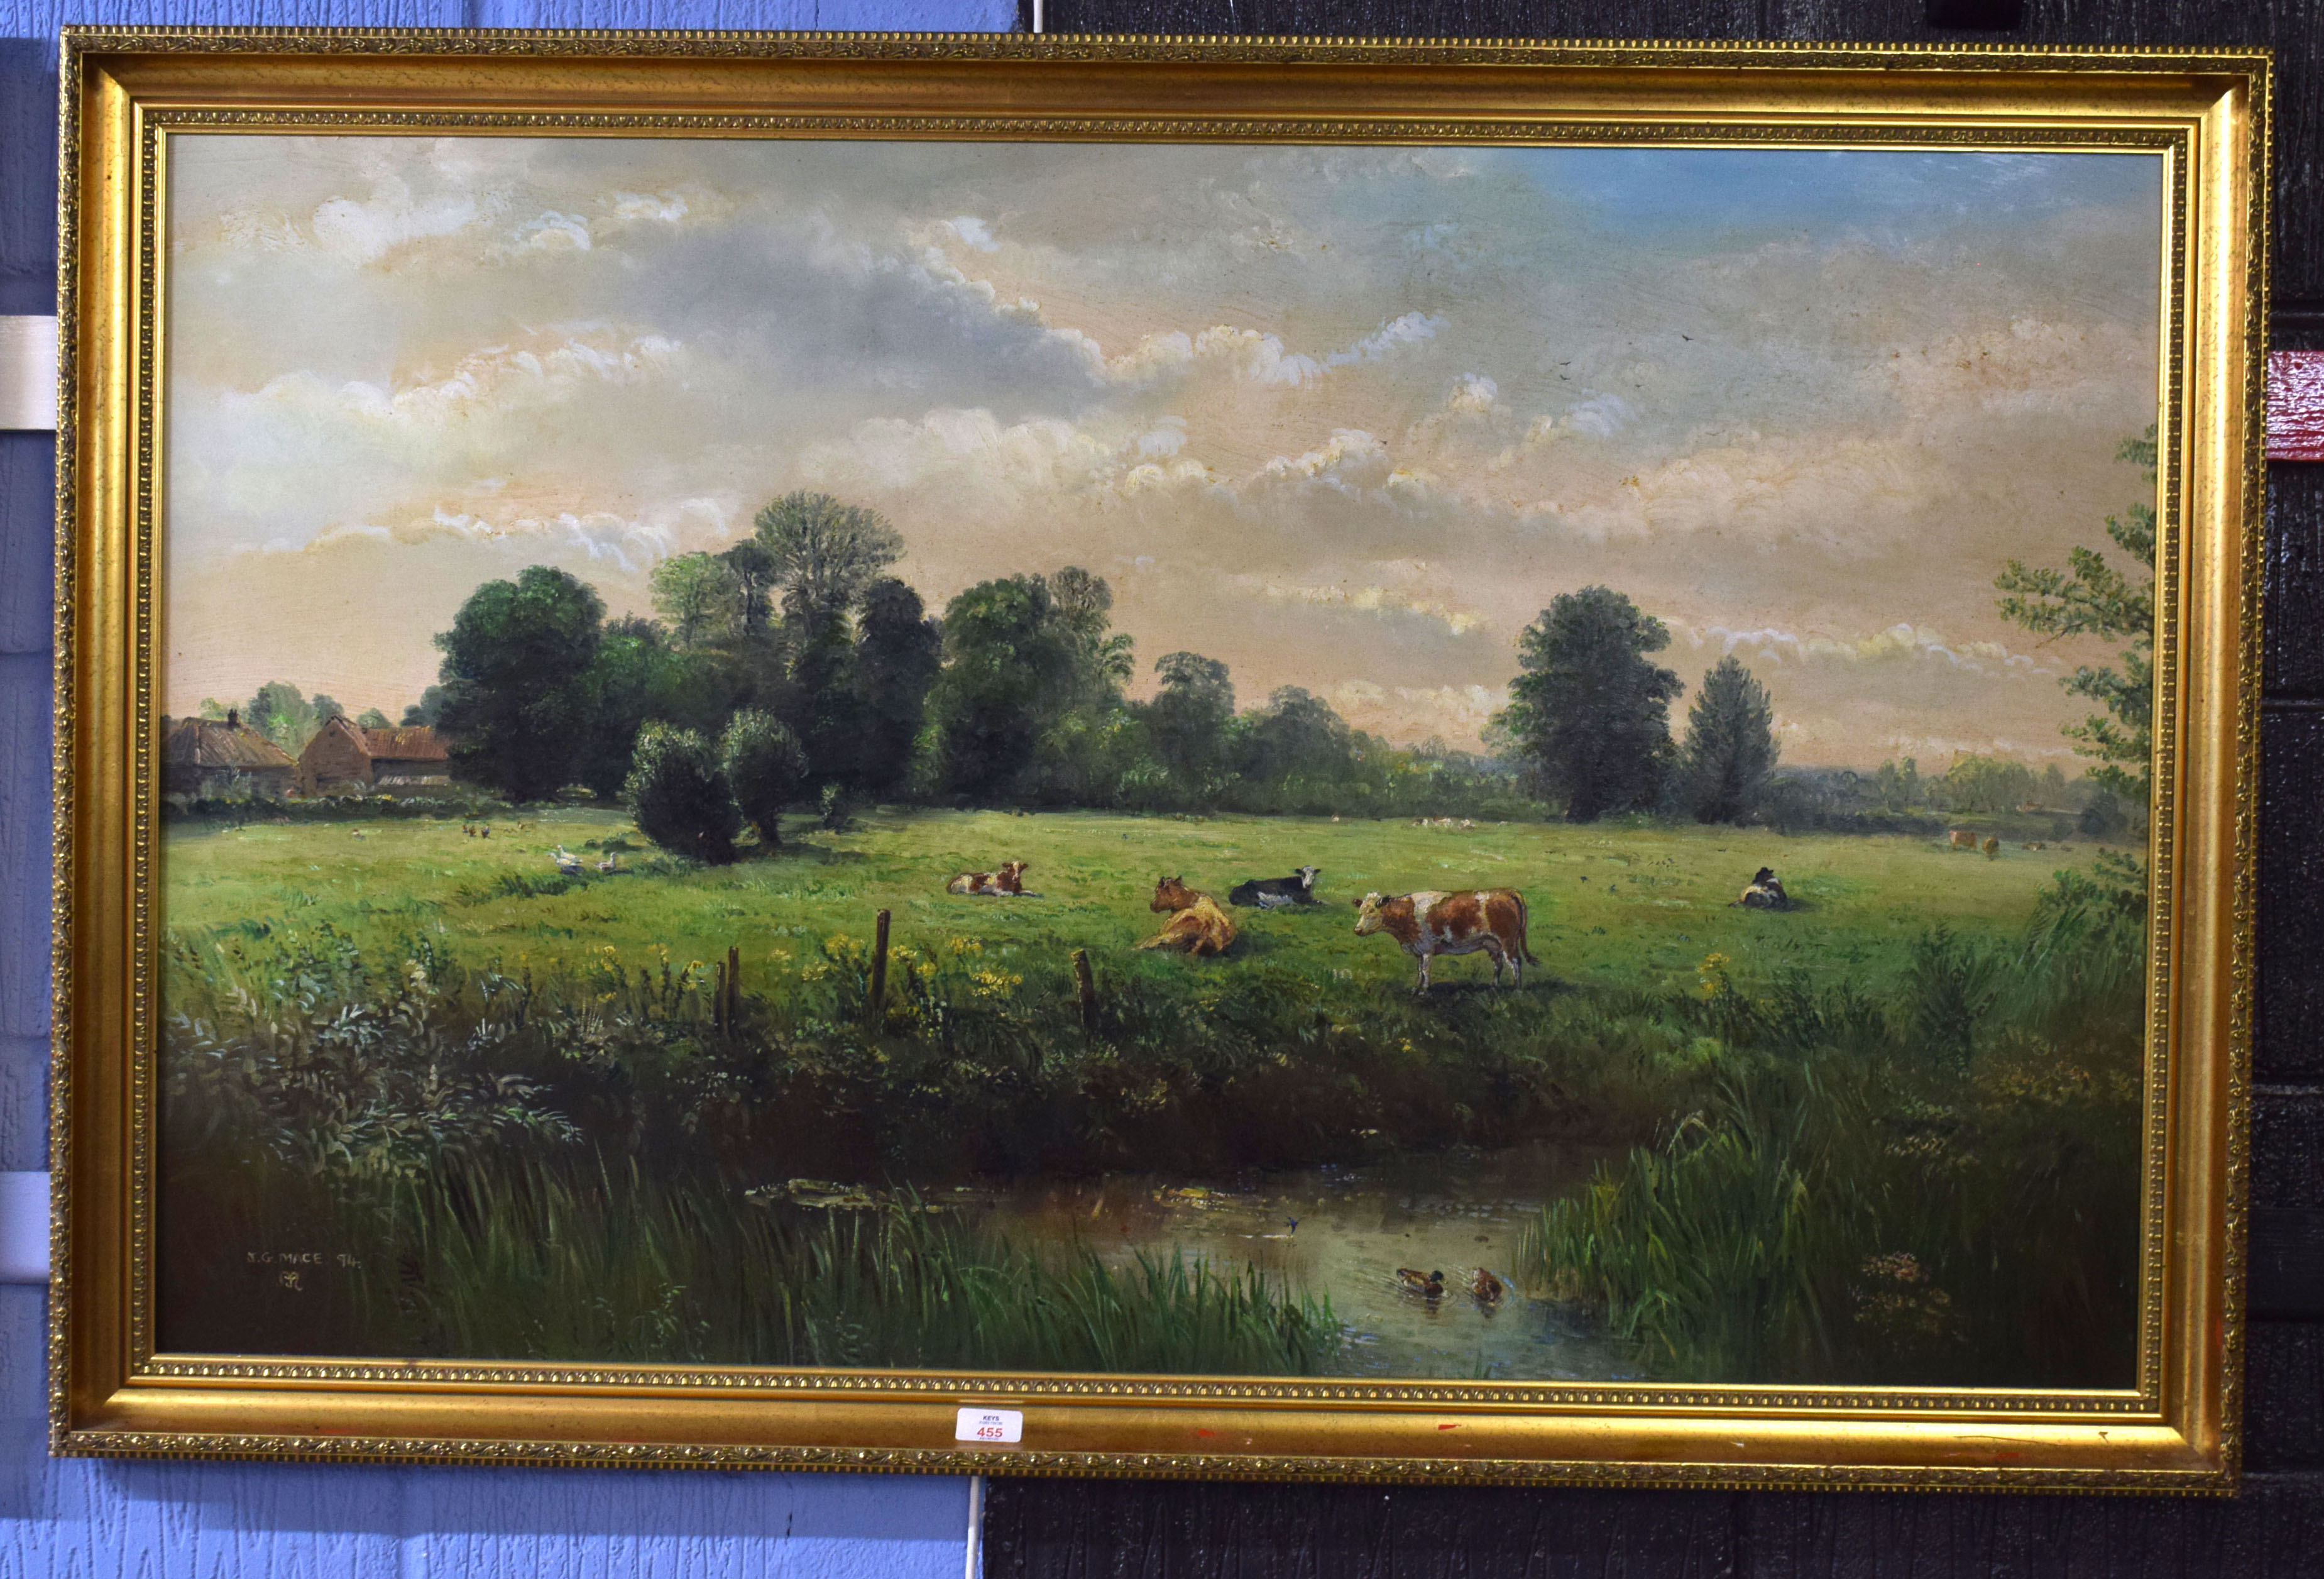 John G Mace (contemporary)^ Landscape with cattle^ oil on board^ signed and dated 94 lower left^